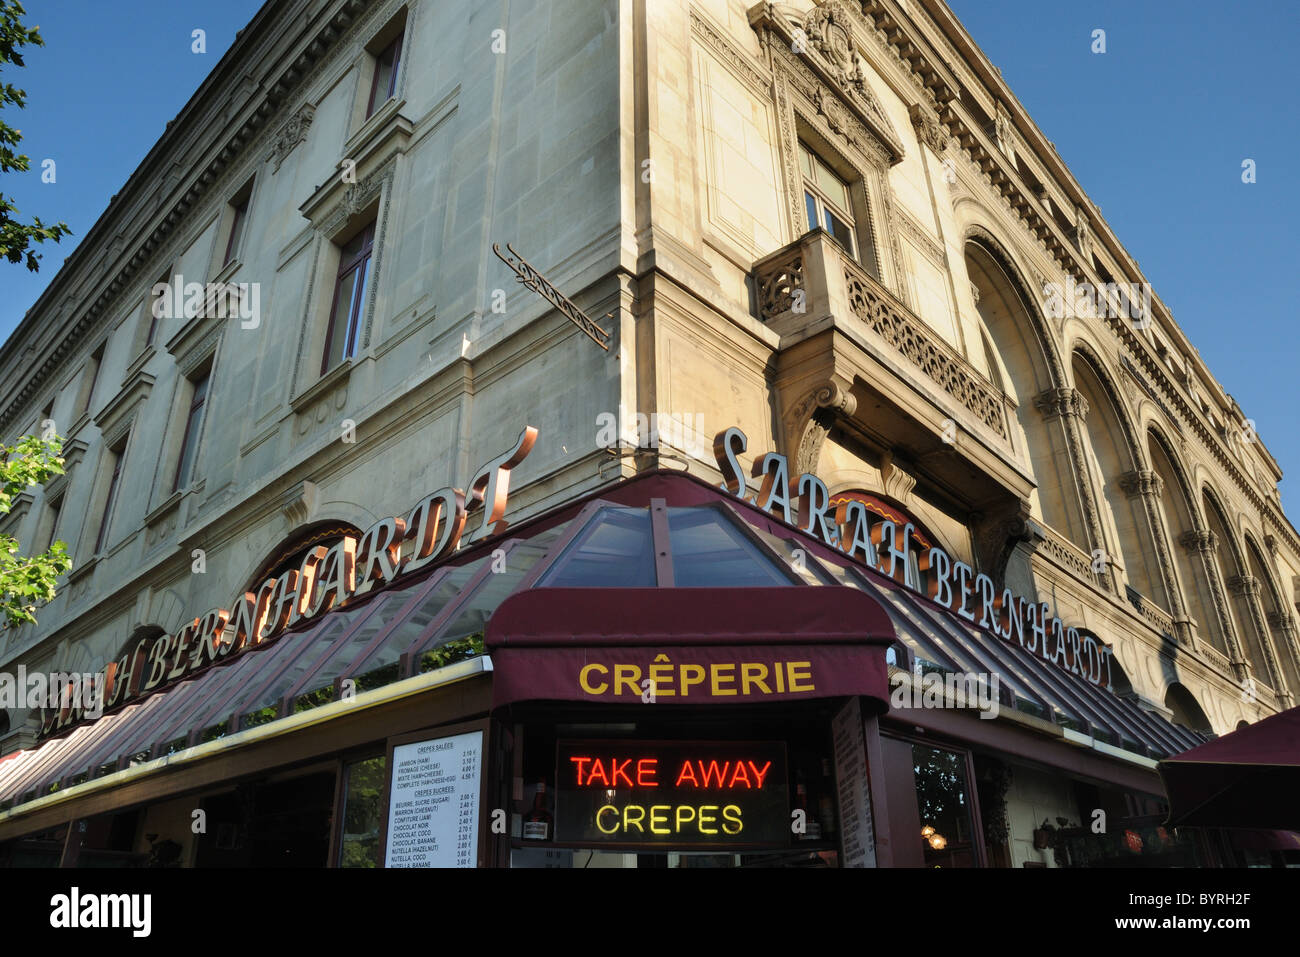 A creperie in Paris France Stock Photo